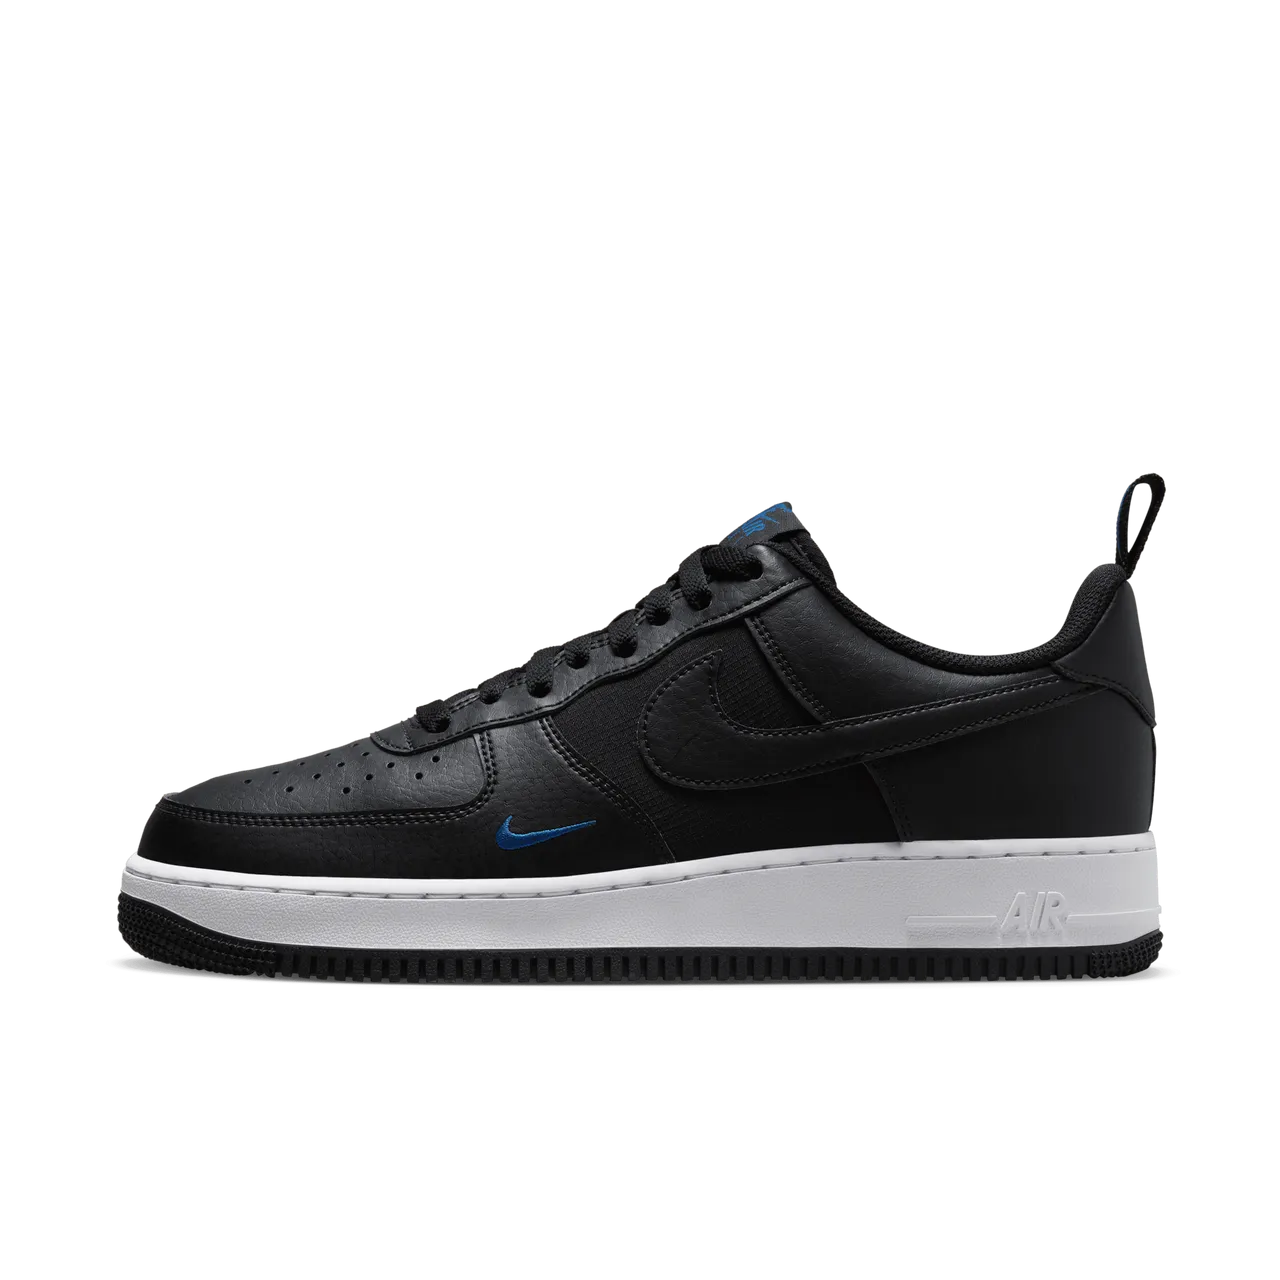 Nike Air Force 1 '07 Men's Shoes - Black - Leather